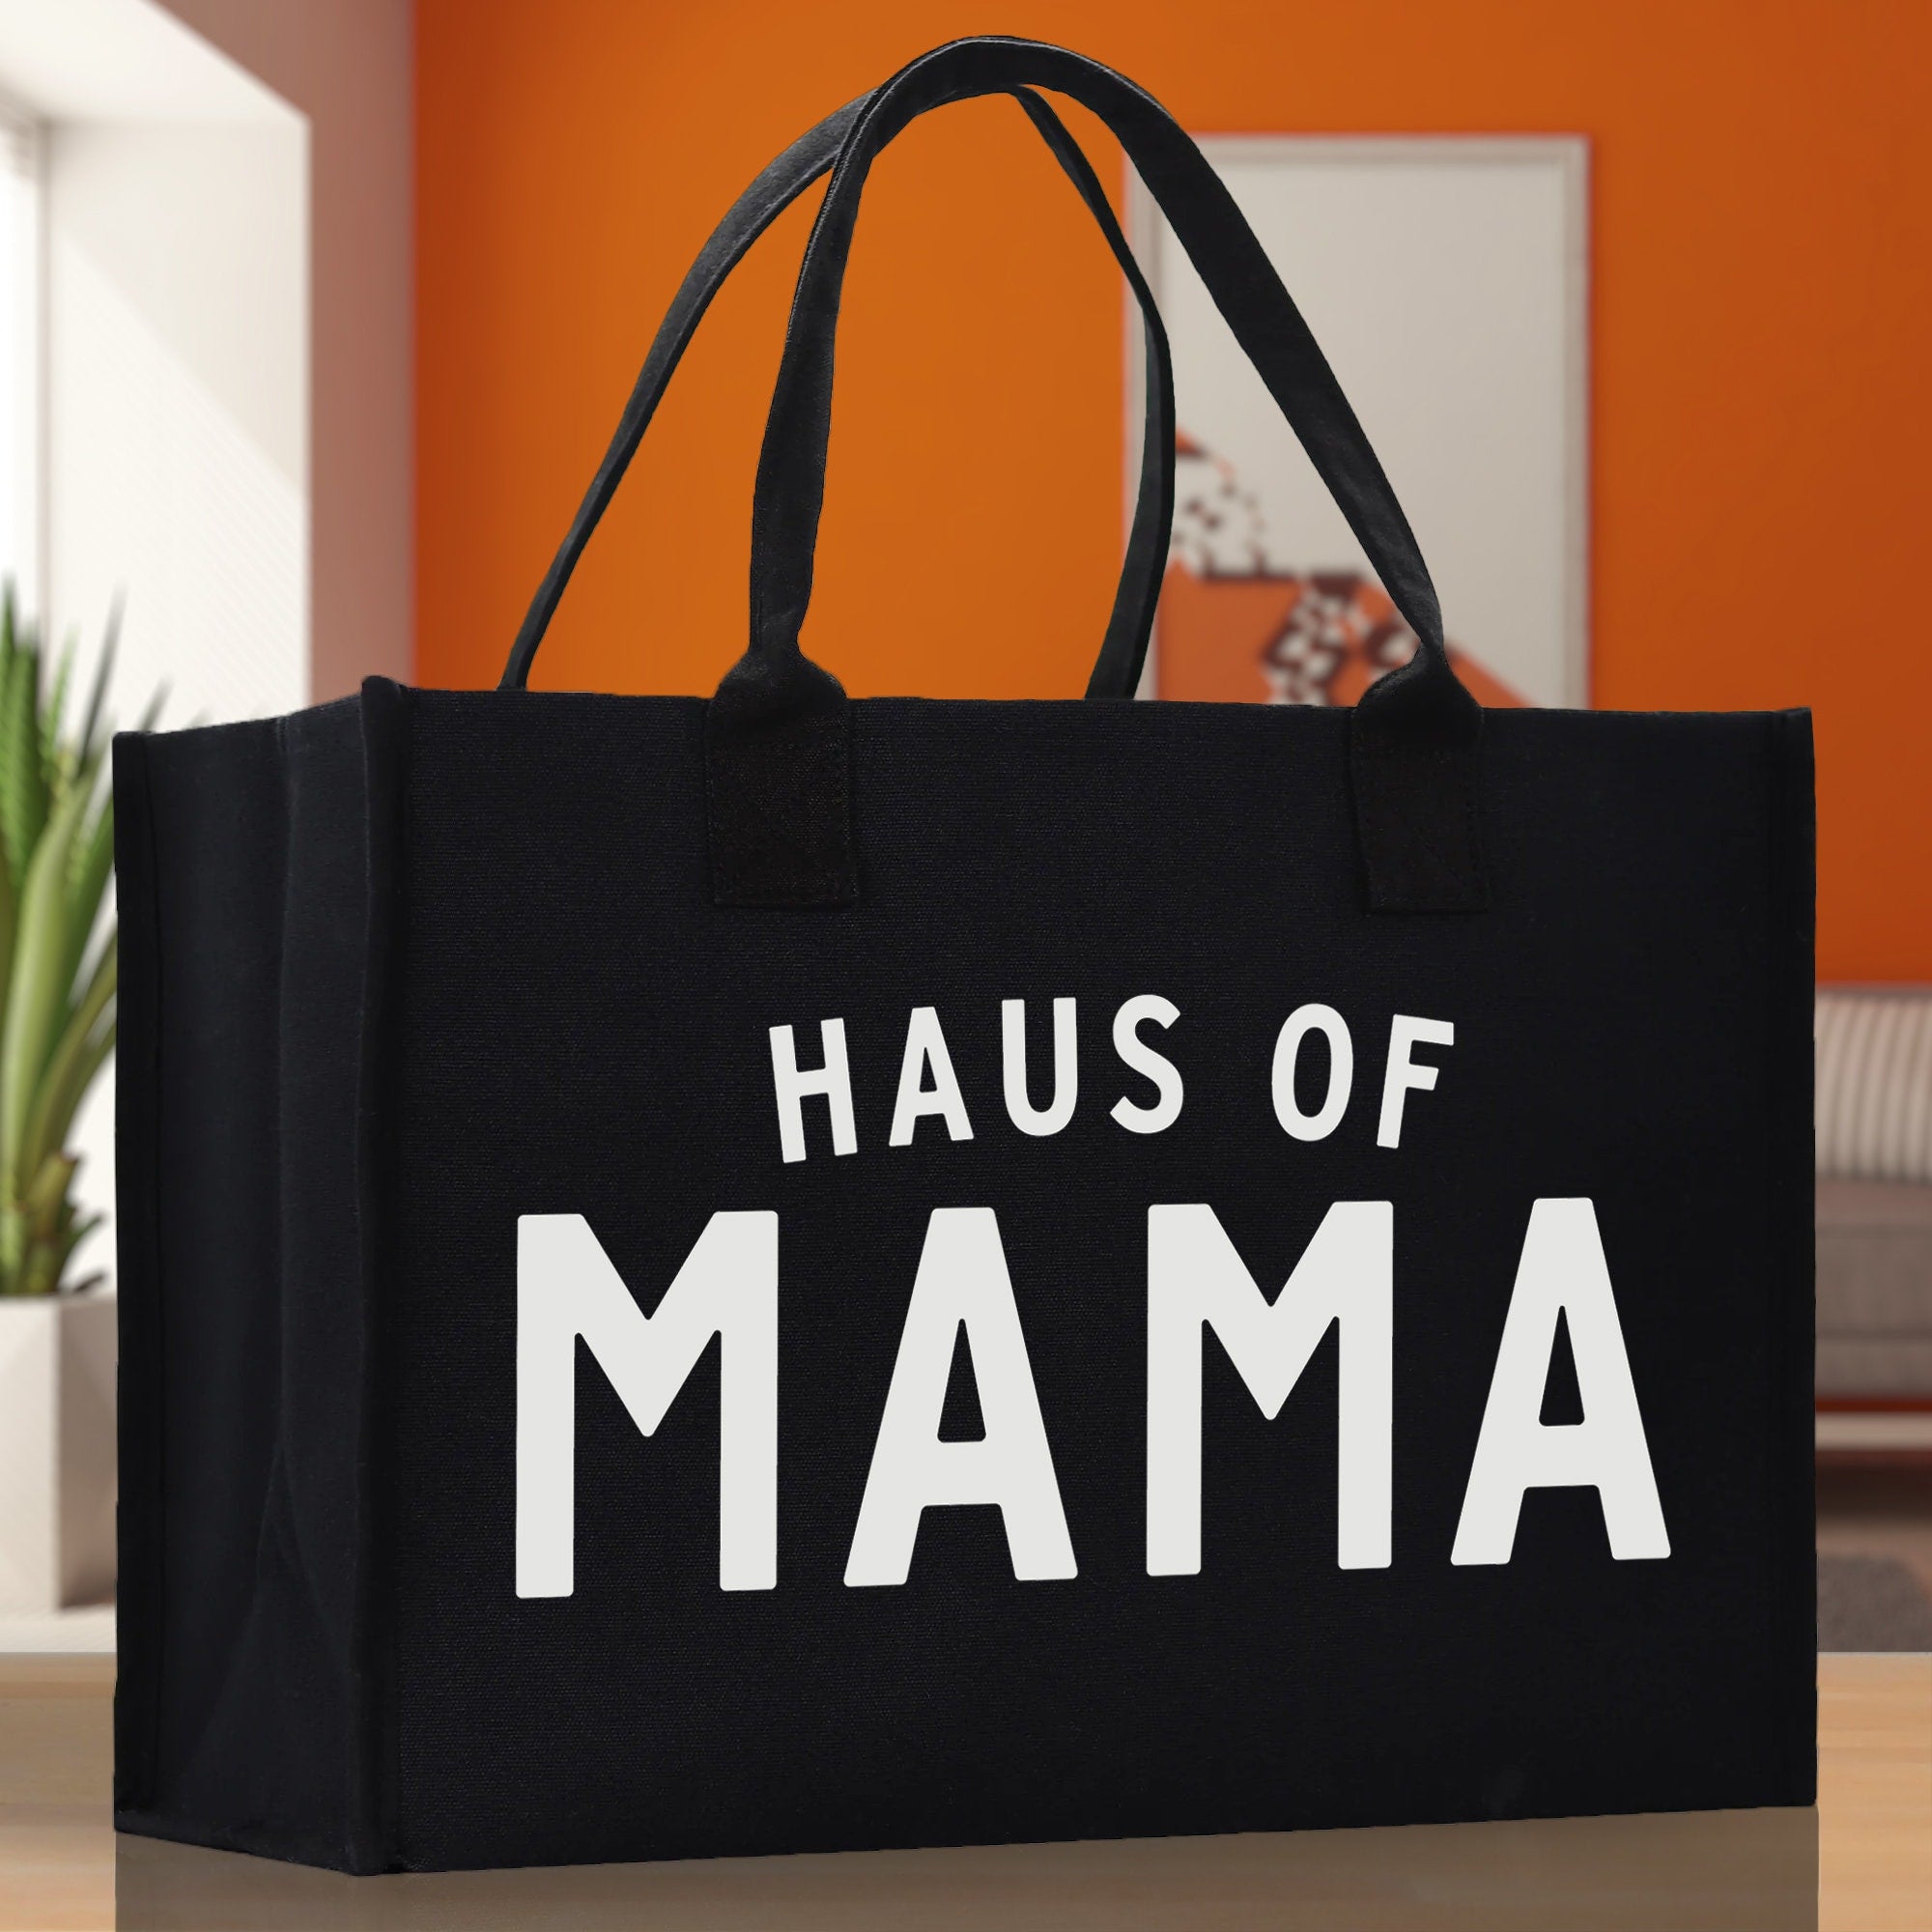 Haus of Mama Cotton Canvas Chic Beach Tote Bag Multipurpose Tote Weekender Tote Gift for Her Outdoor Tote Vacation Tote Large Beach Bag